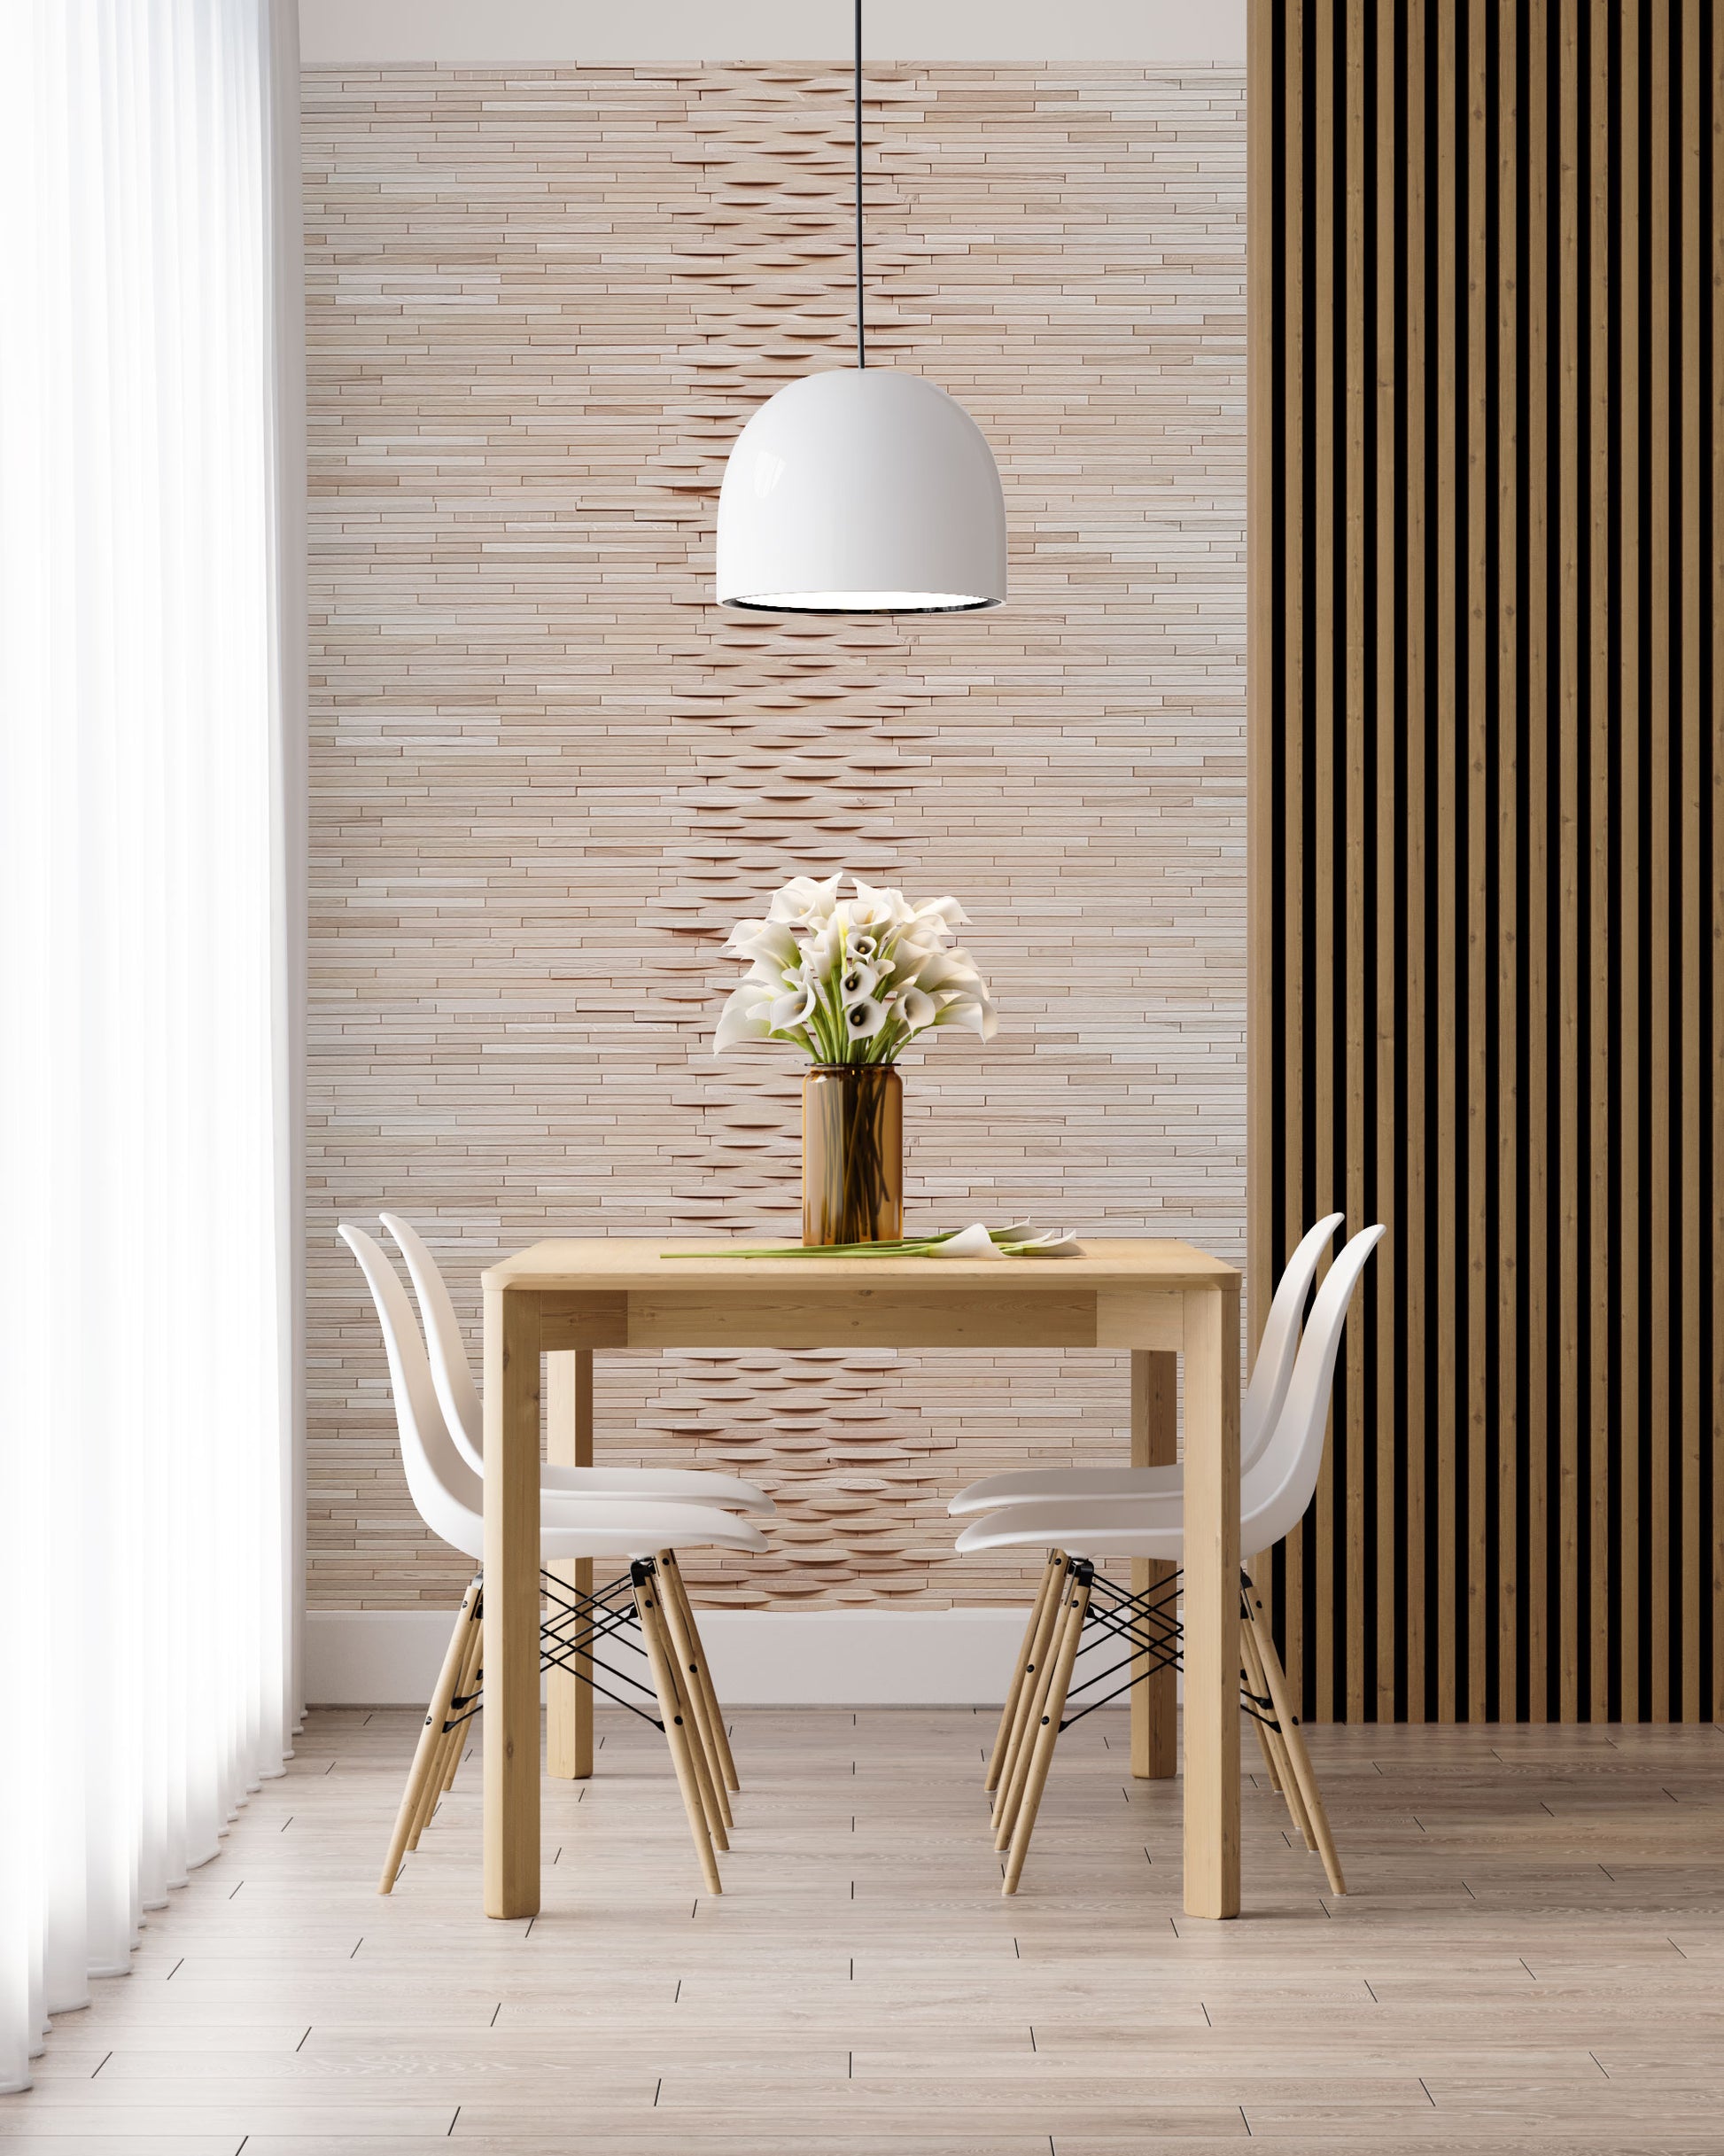 living room feature wall decorative surface in 3d oak 